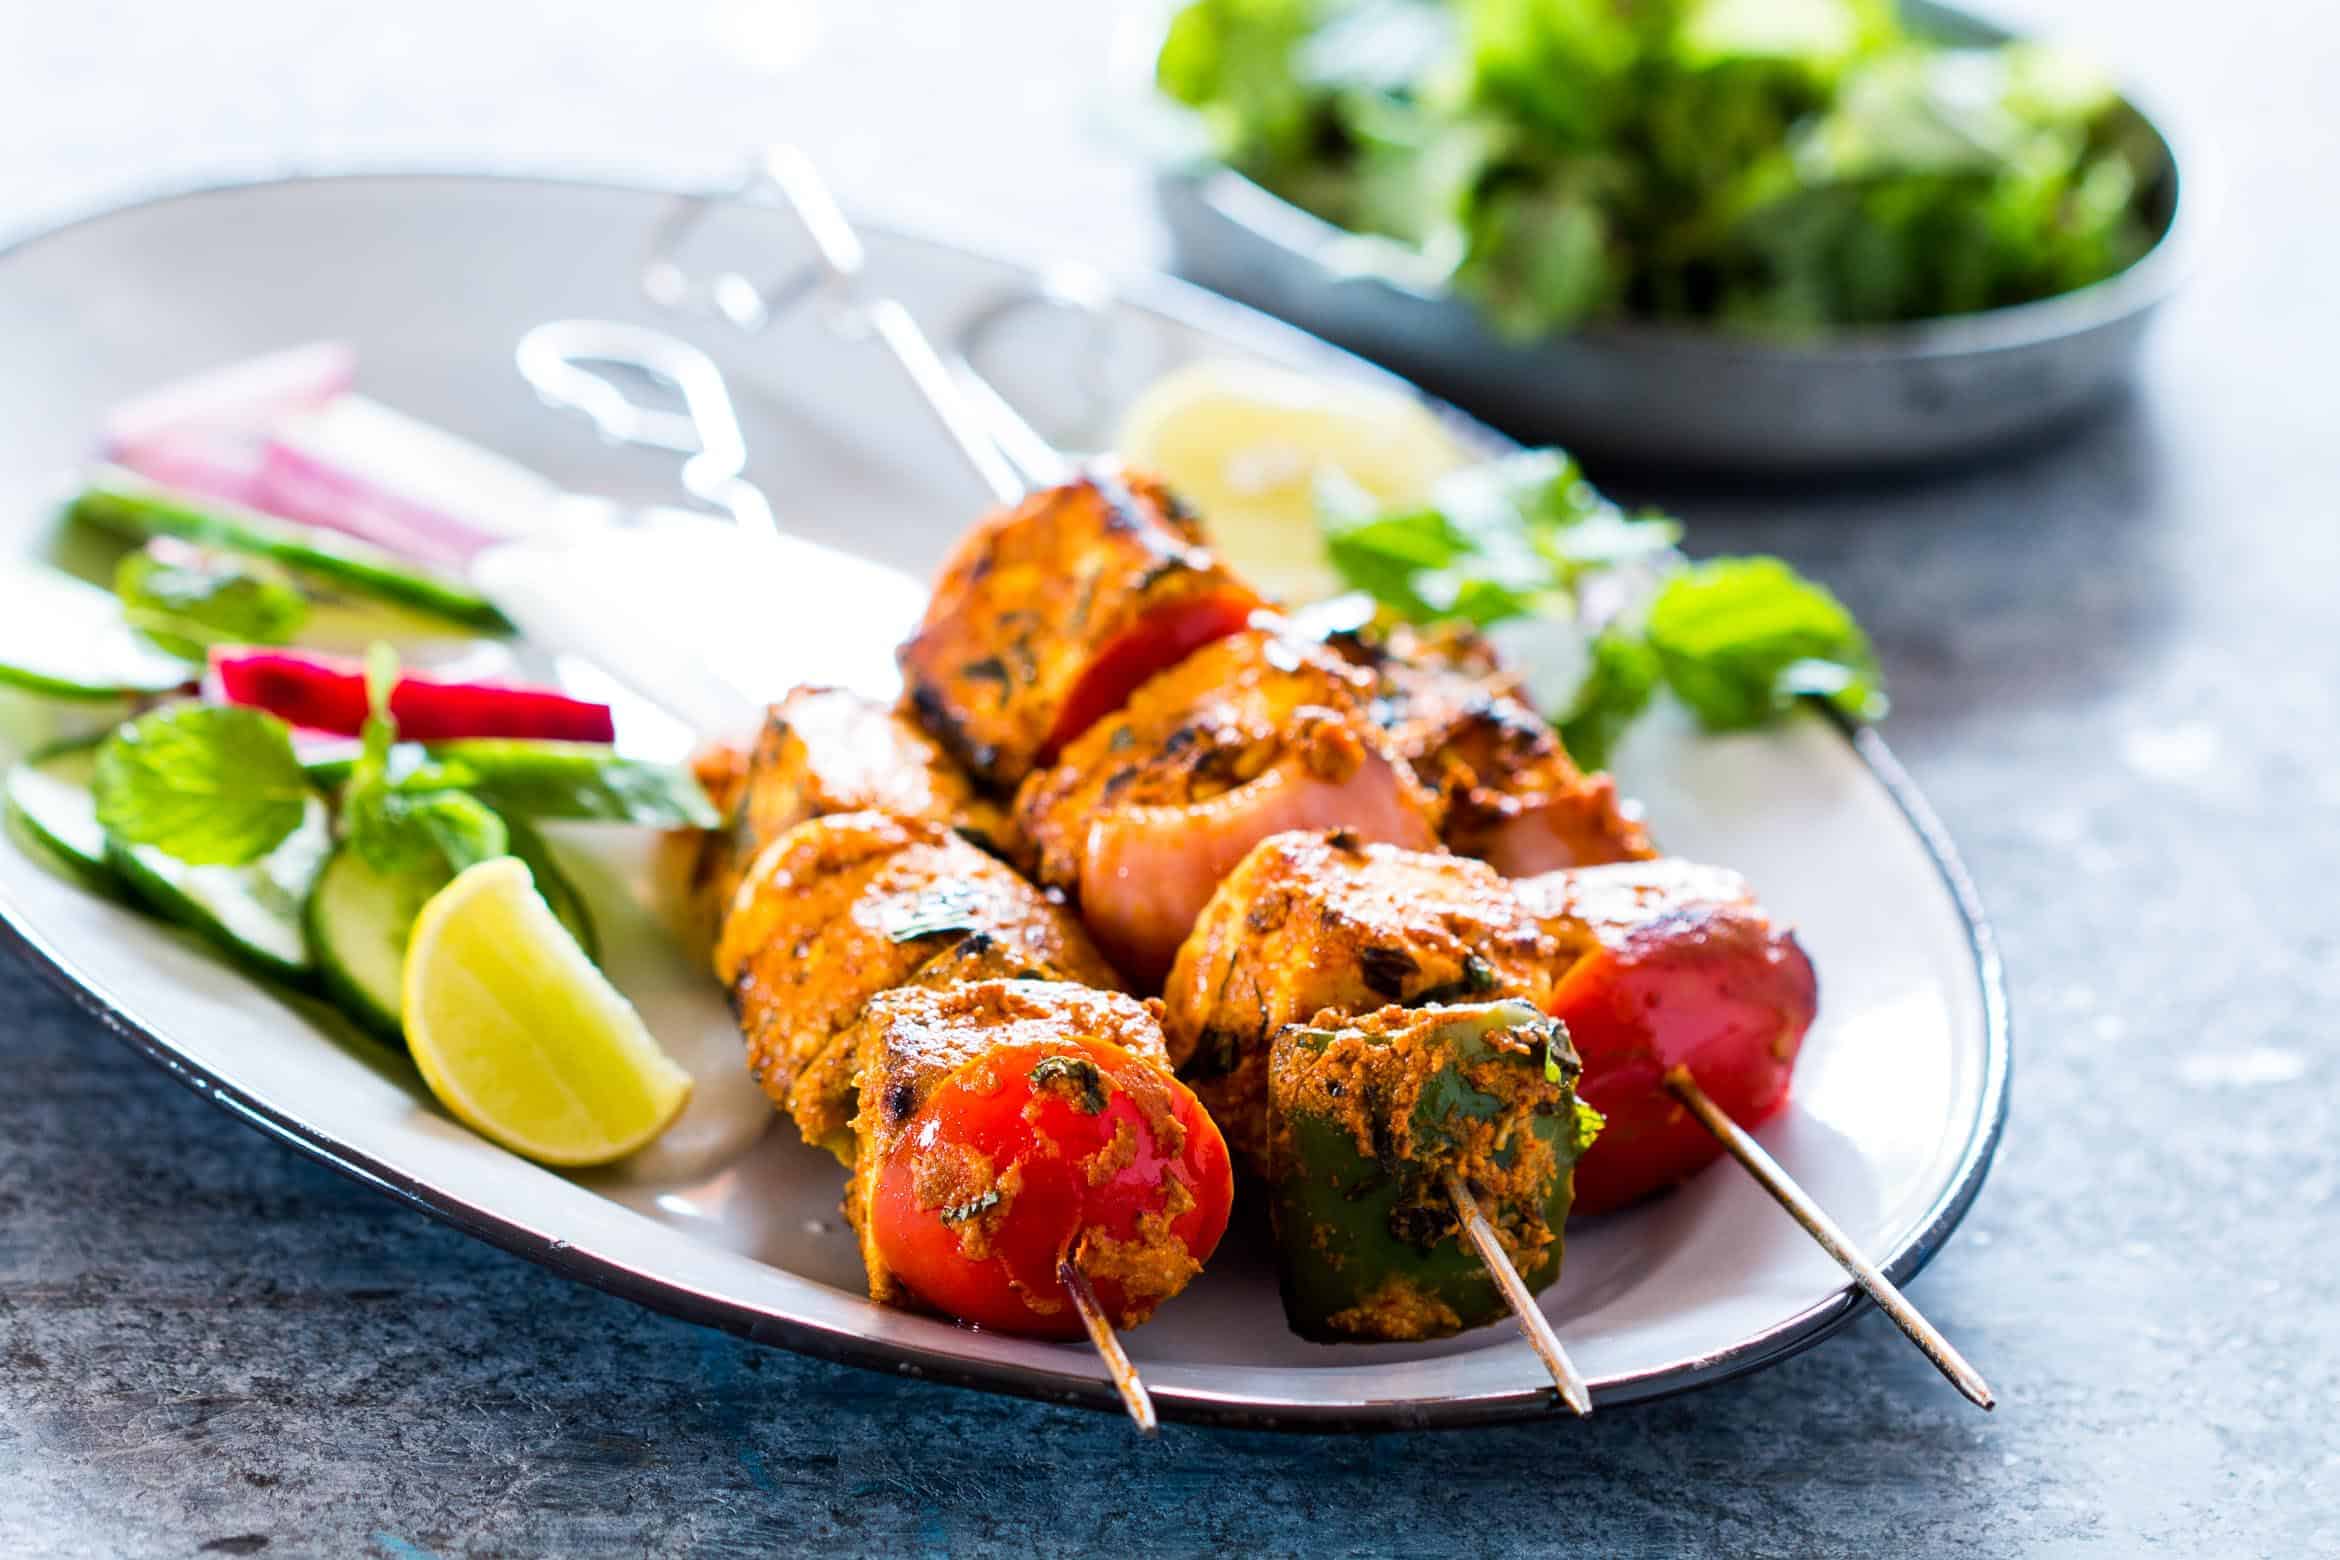 This is the best Tandoori Paneer Tikka in the oven you'll ever make at home! Same restaurant style taste, but roasted in the oven.